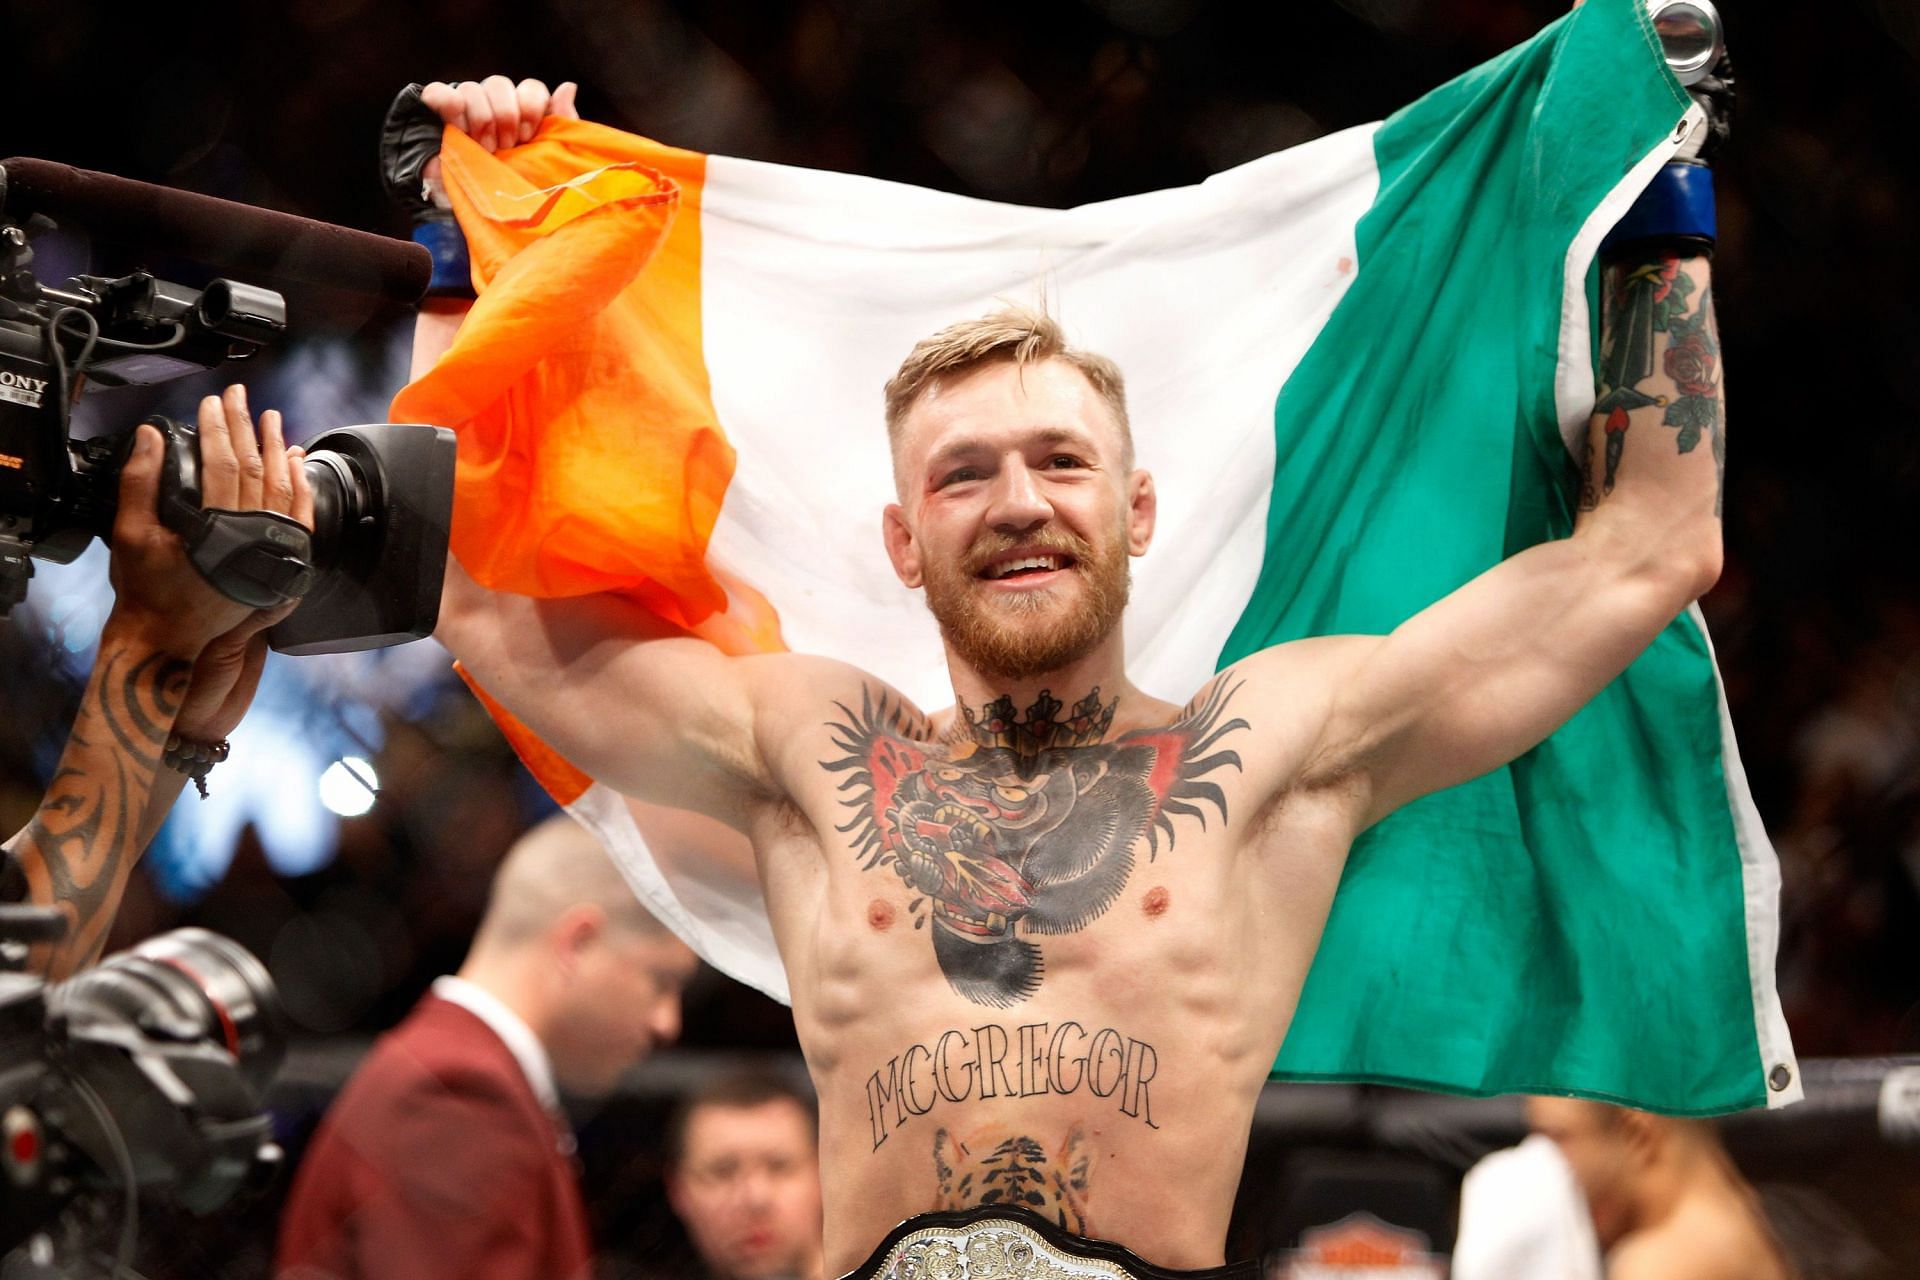 Another bad loss could make Conor McGregor consider his future in MMA